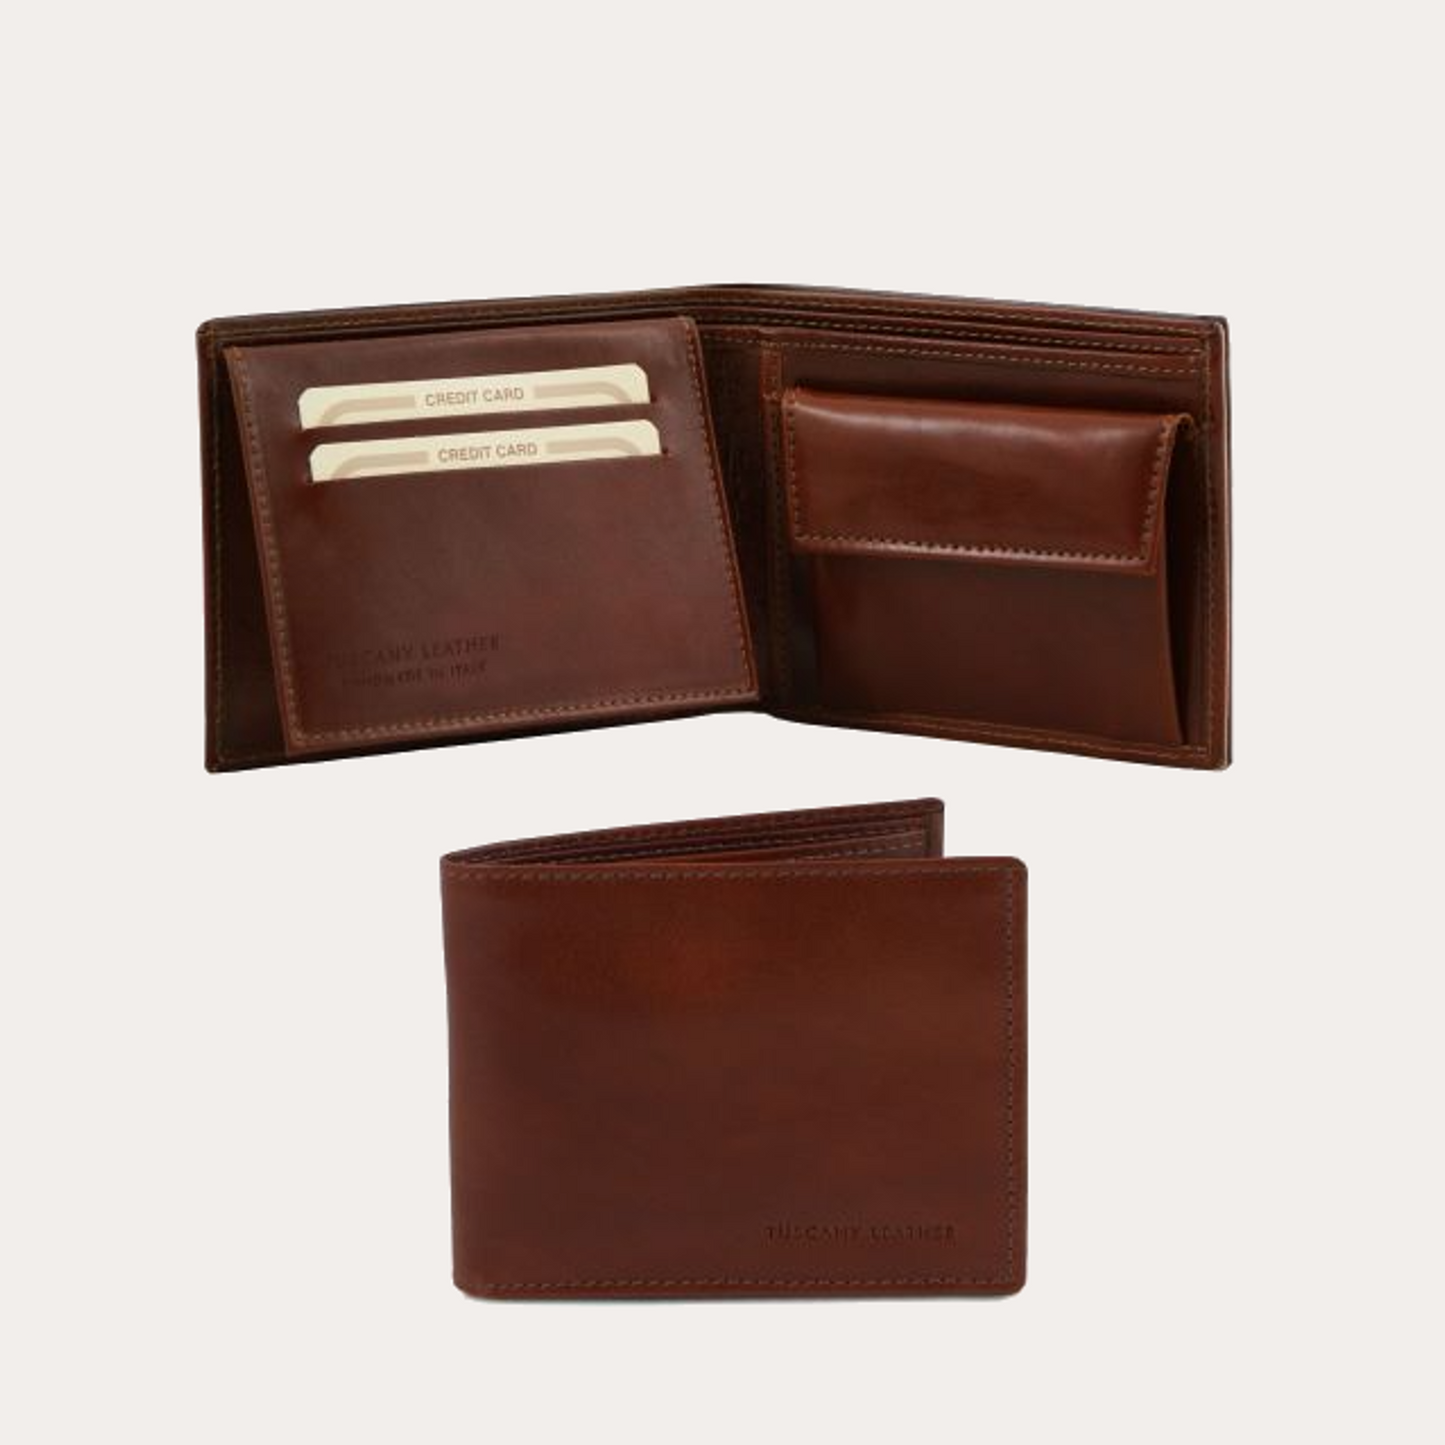 Tuscany Leather Brown 2 Fold Leather Wallet with Coin Pocket